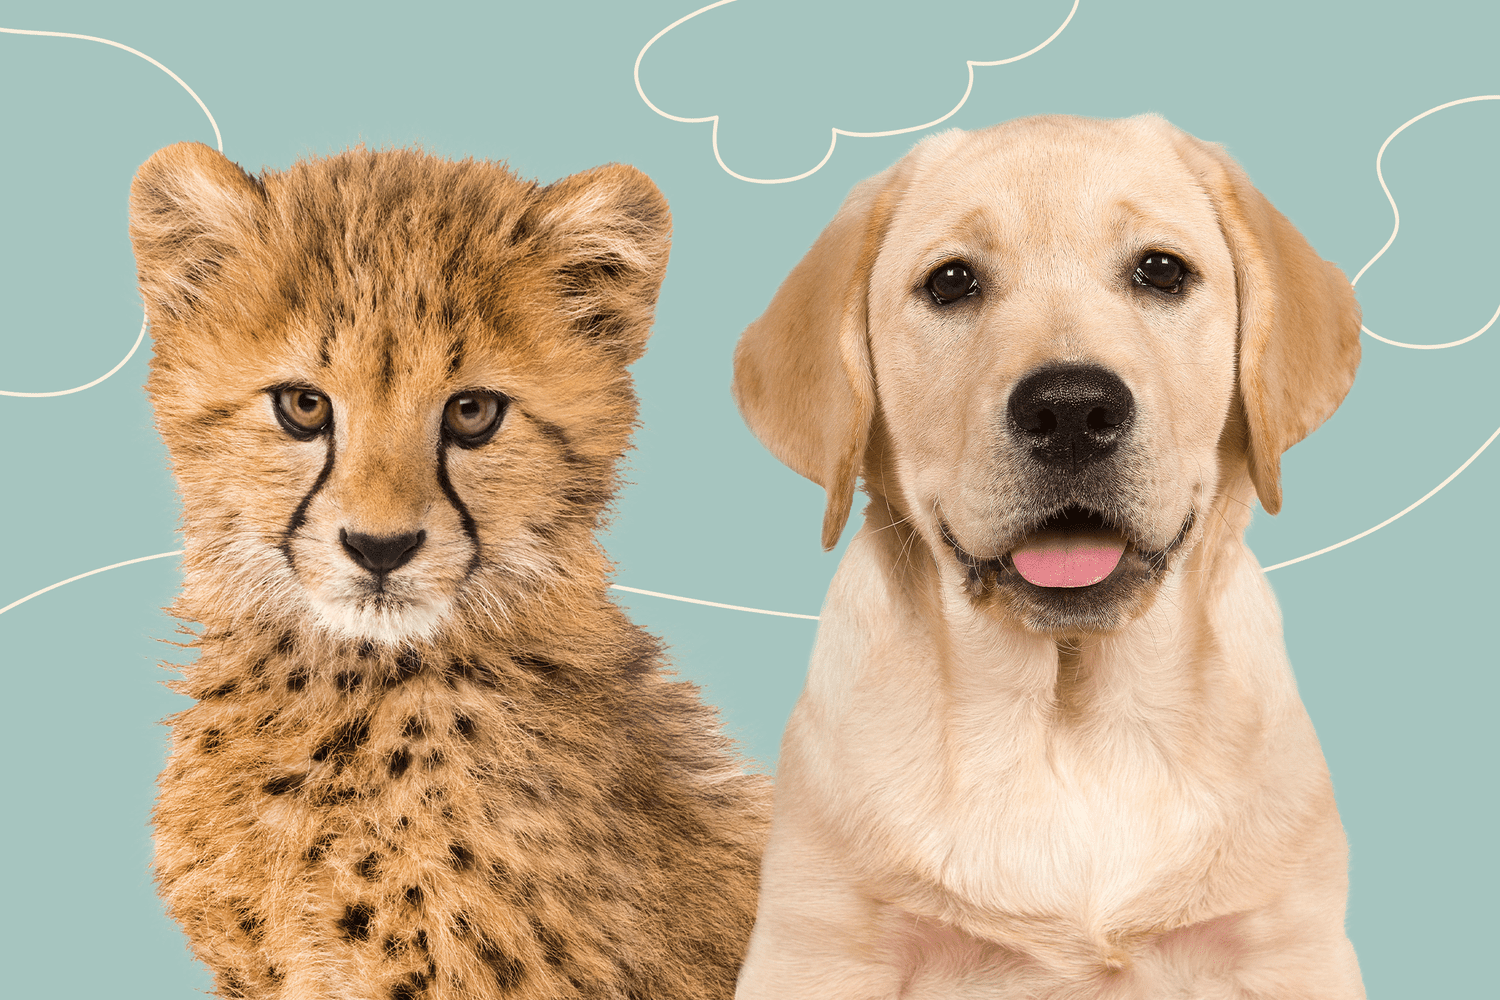 cheetah and yellow lab an unlikely pair